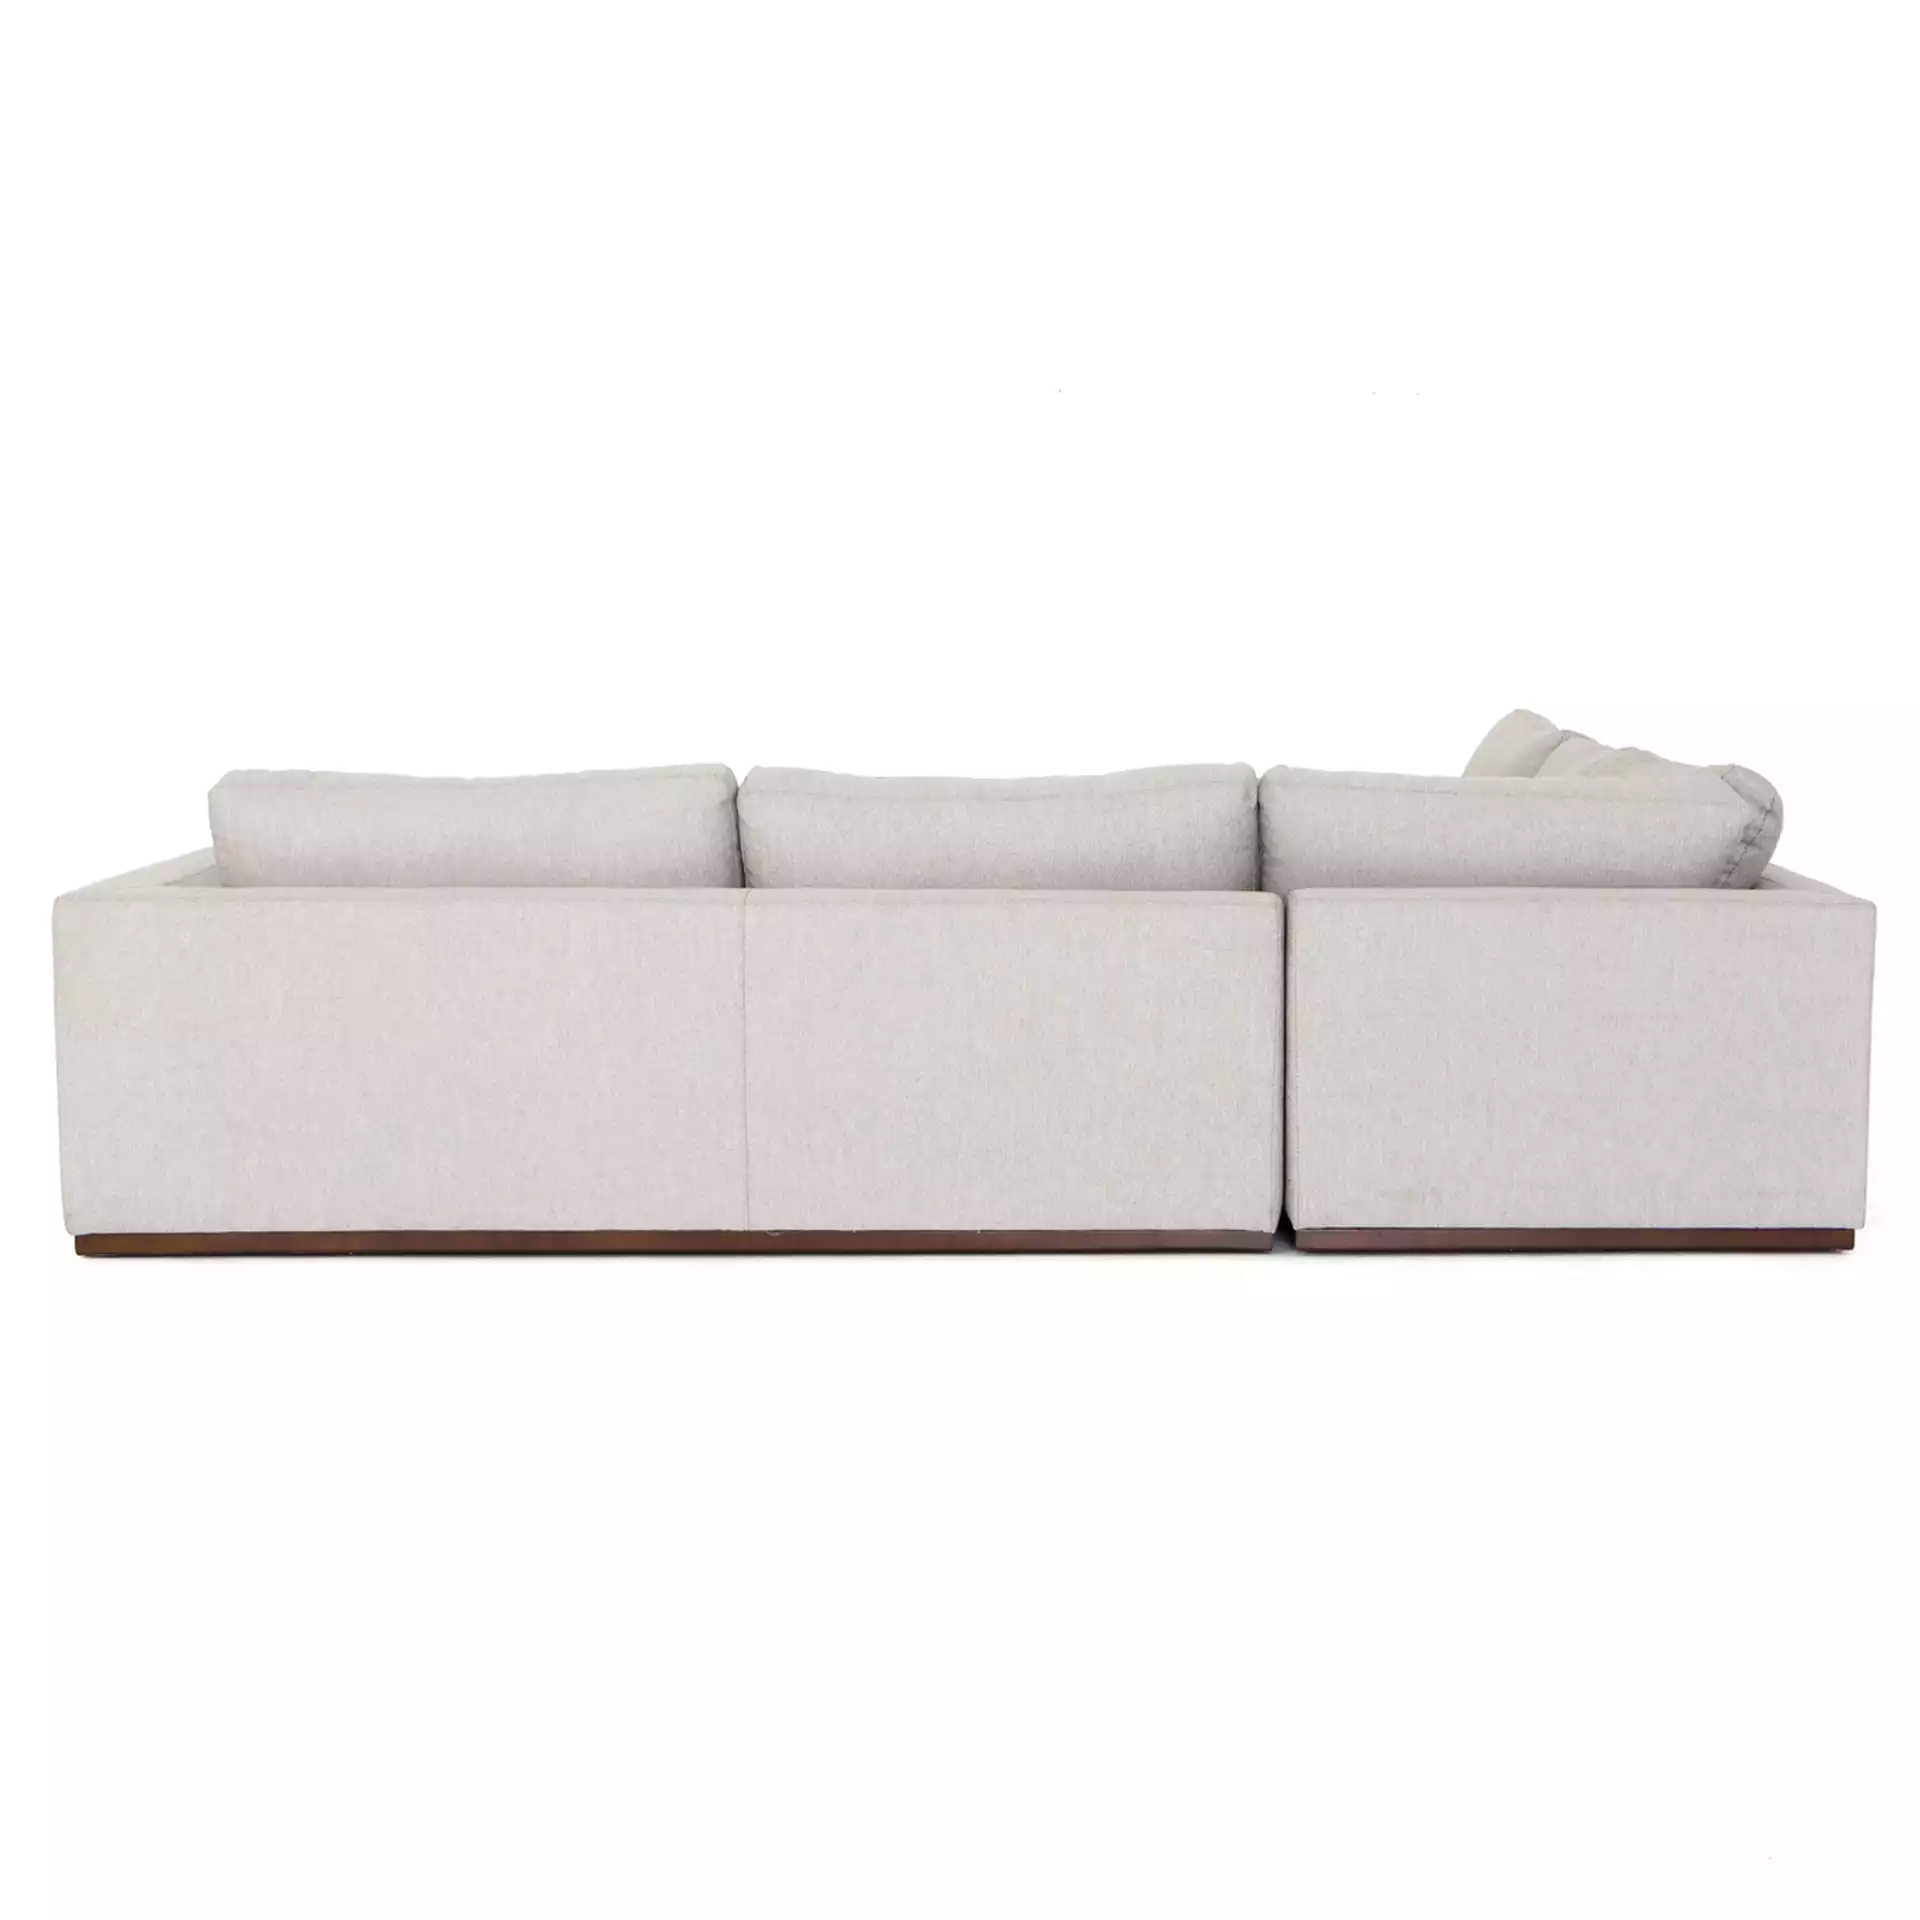 Stanley Modern Classic Light Grey Upholstered 3 Piece Sectional Sofa